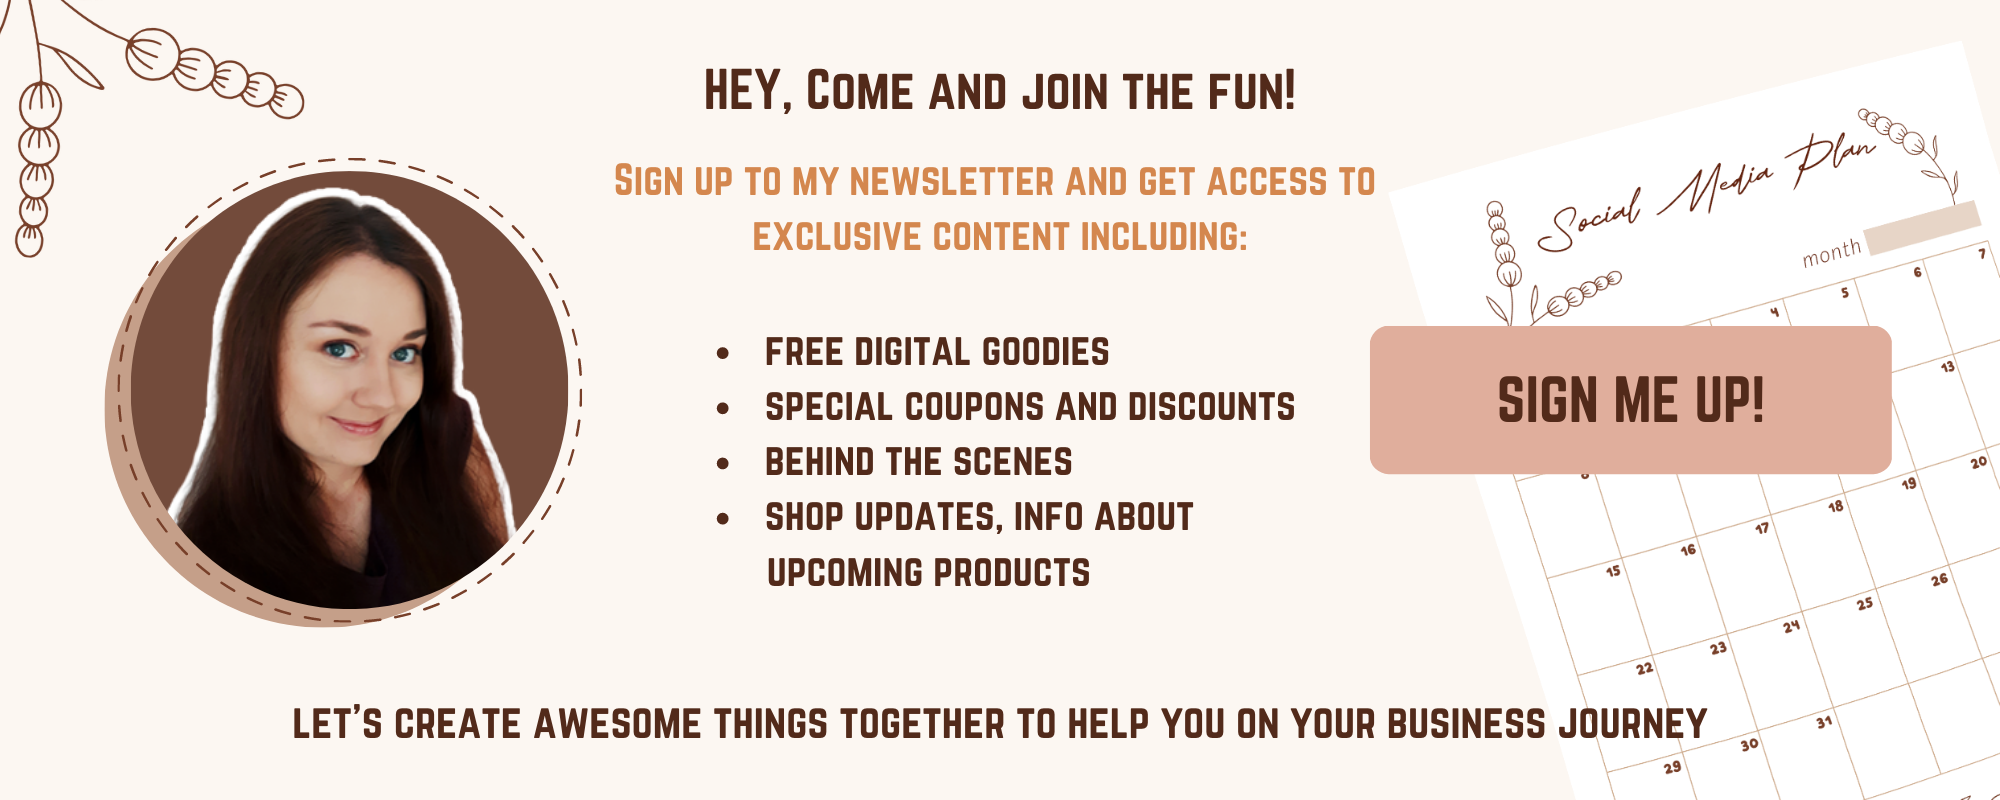 Sign up to my newsletter and get access to exclusive content including: free digital goodies, special coupons and discounts, behind the scenes, shop updates, info about upcoming products and more!